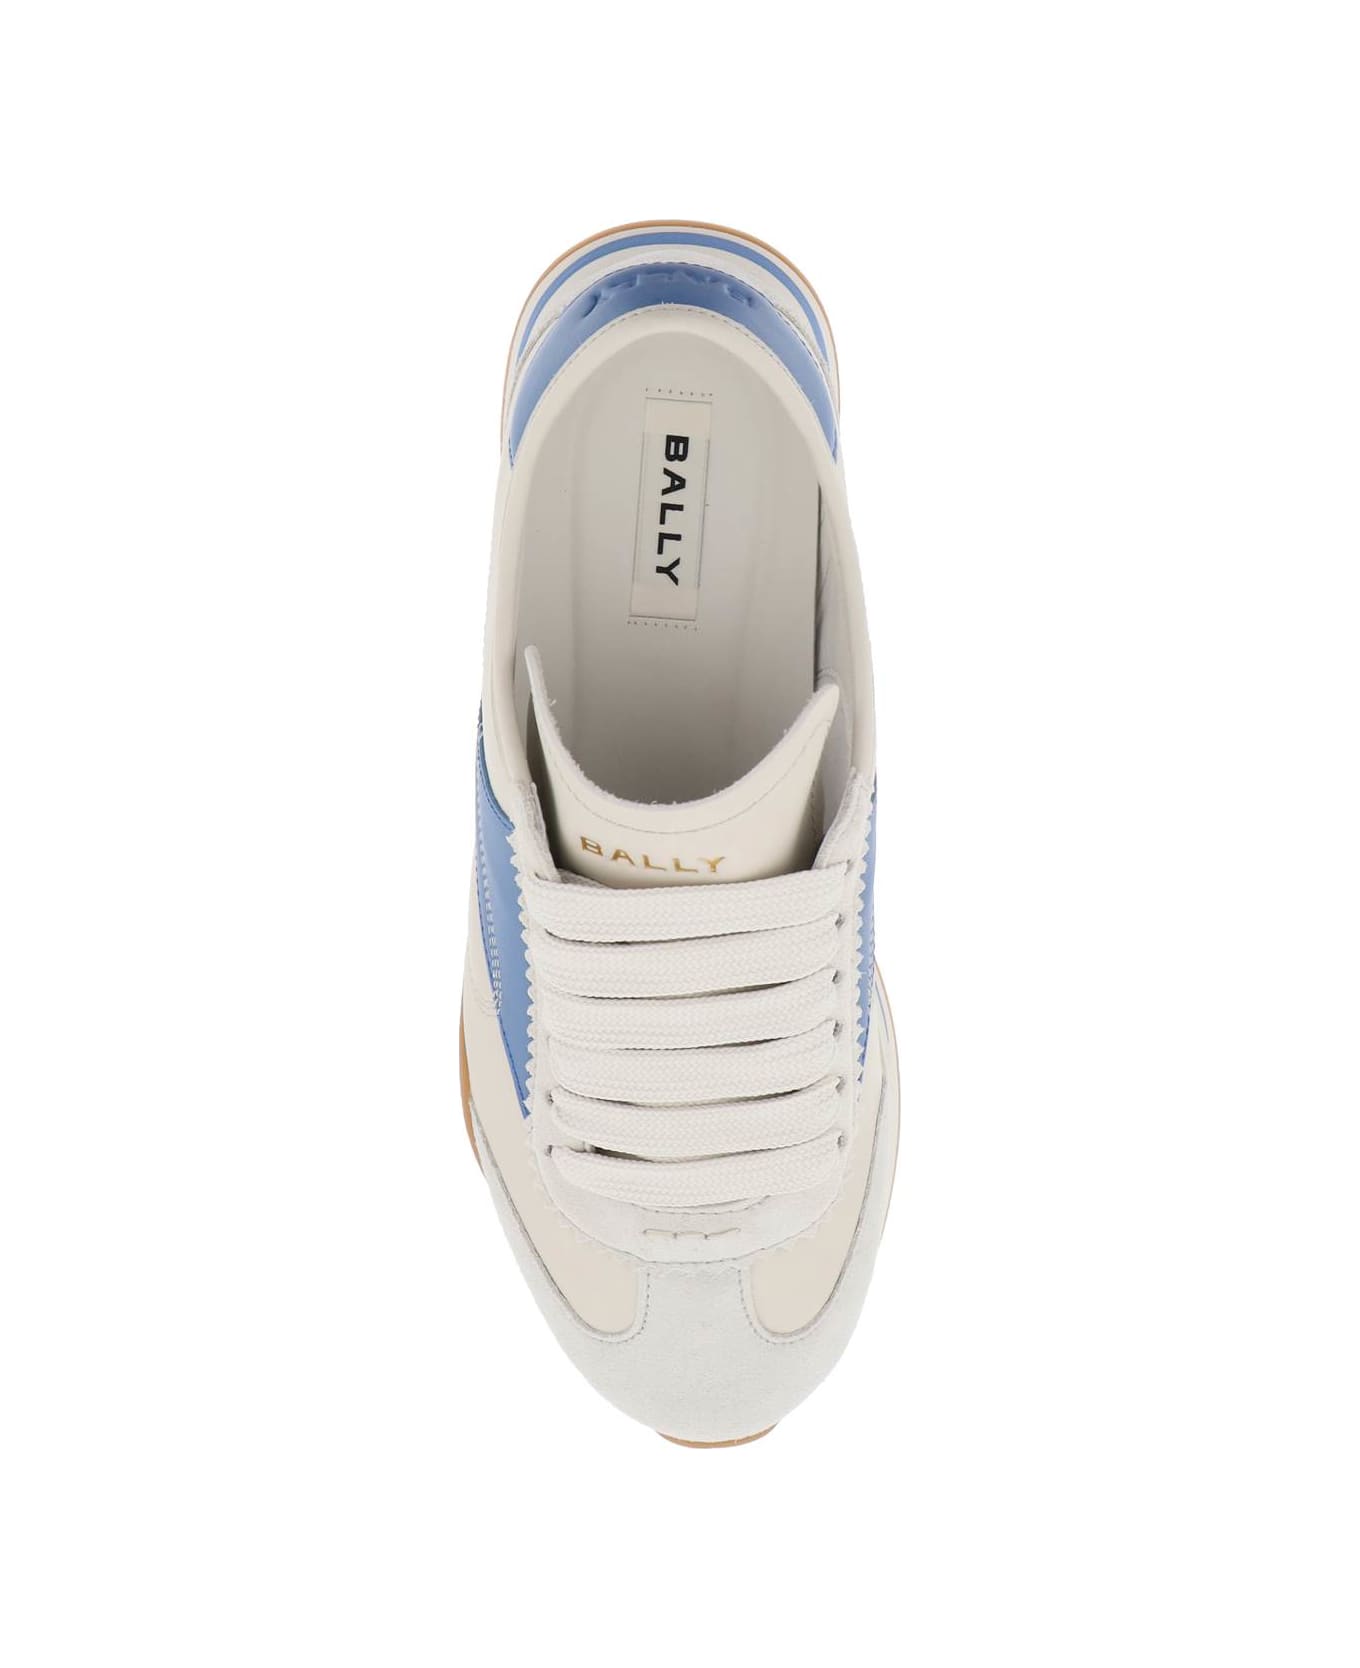 Bally Leather Sonney Sneakers - DUSTYWHITE BLUE KISS (Grey)